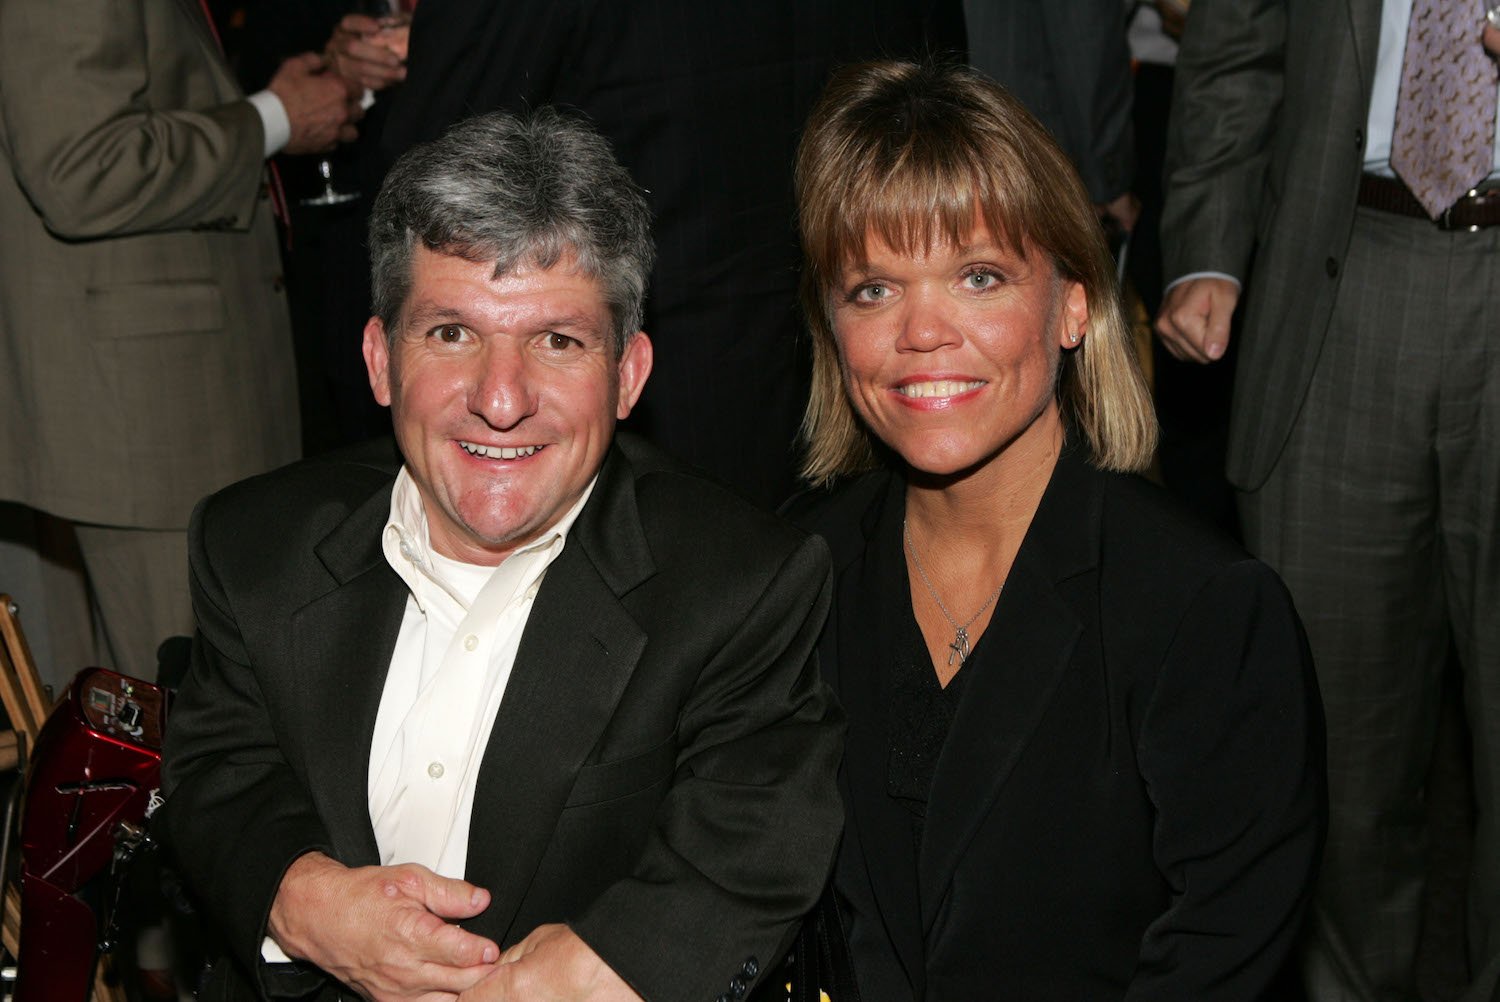 Matt and Amy Roloff from 'Little People, Big World' smiling together against a black background